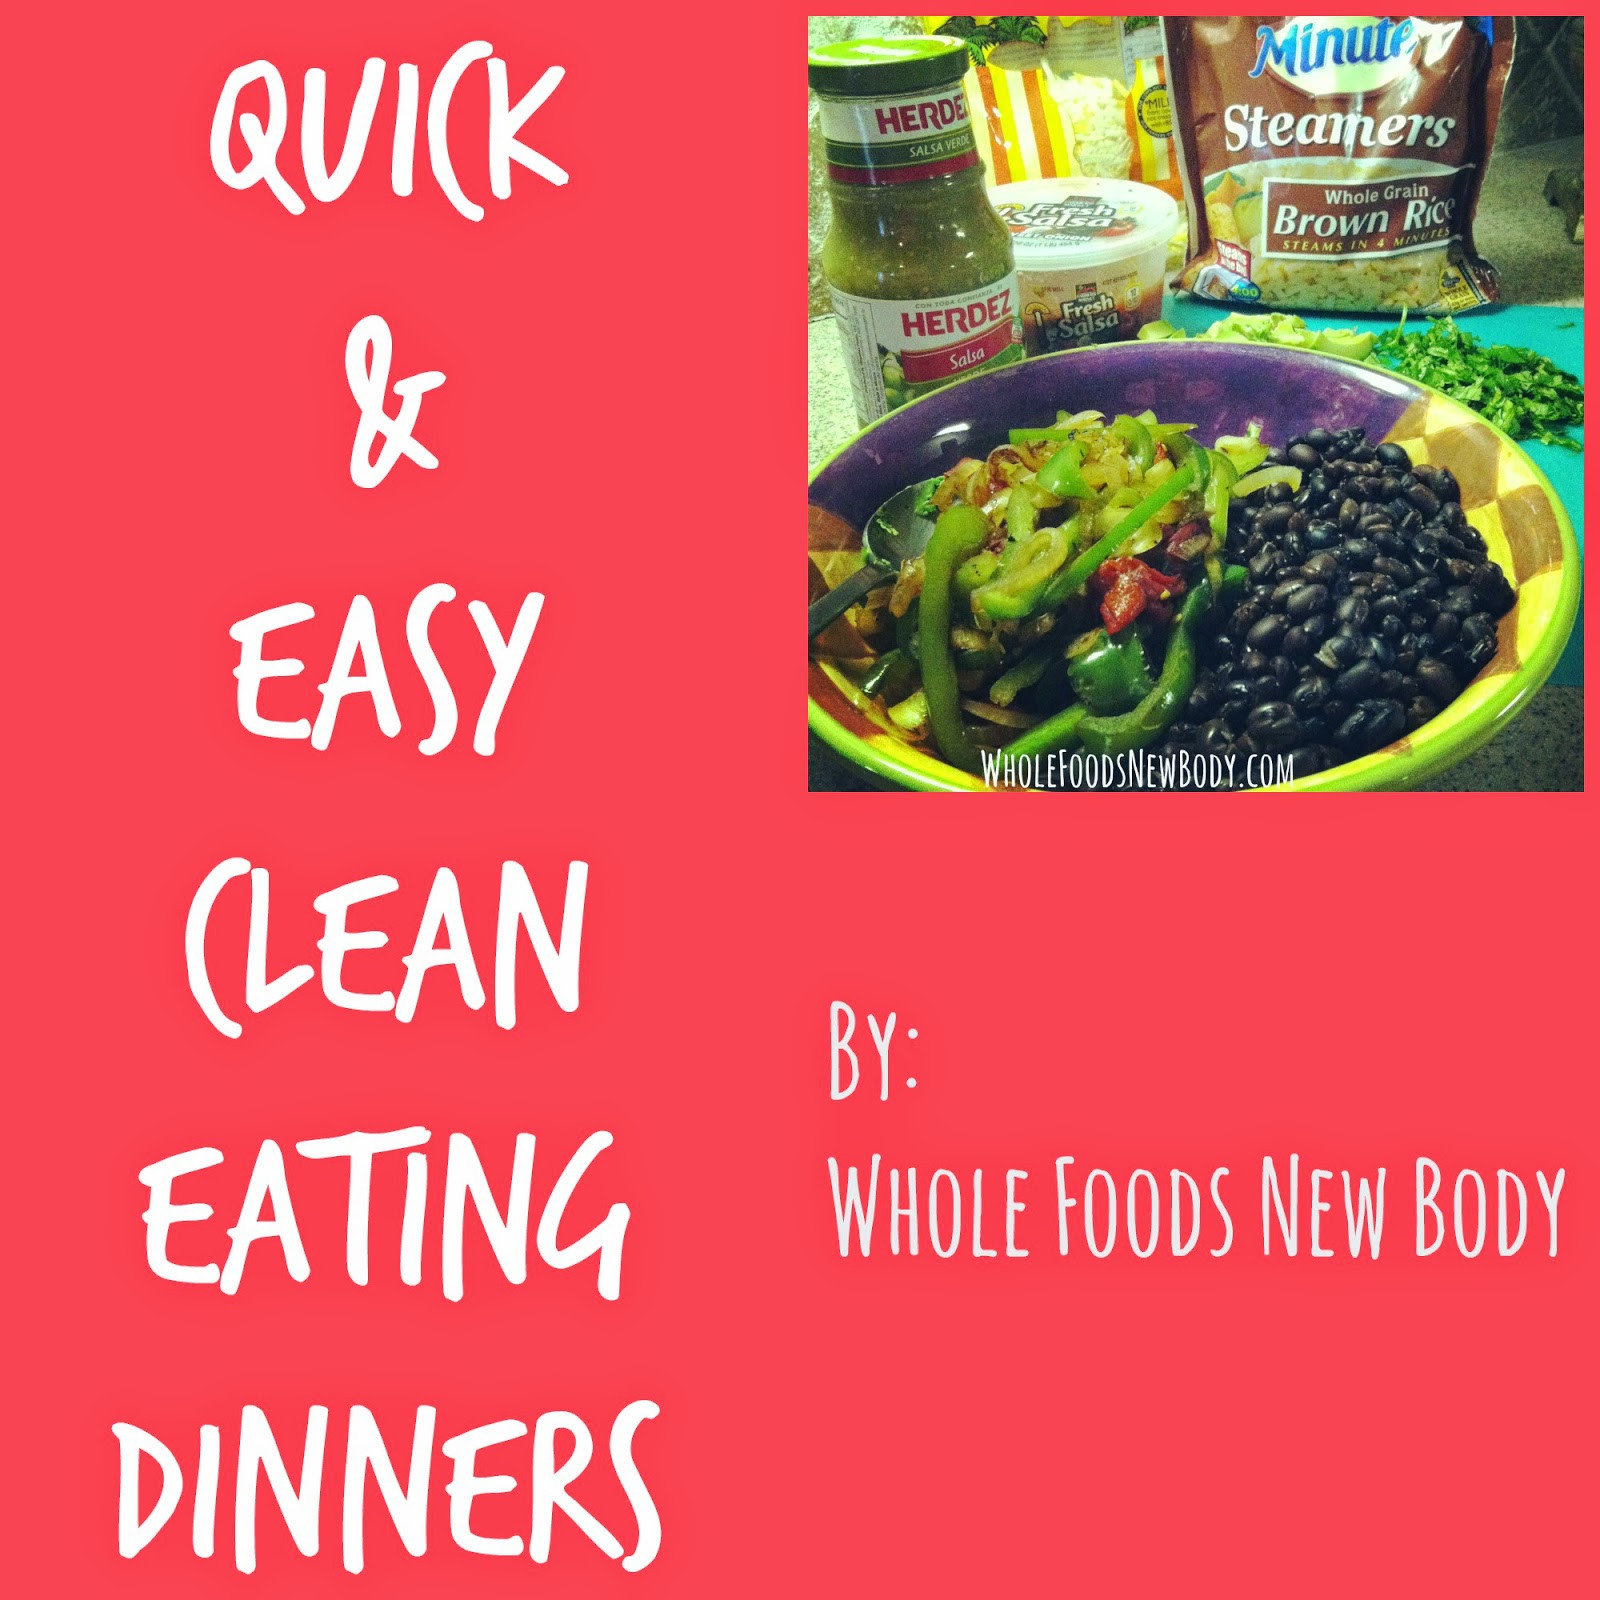 Easy Clean Eating Dinners
 Whole Foods New Body My Top 5 Quick & Easy Clean